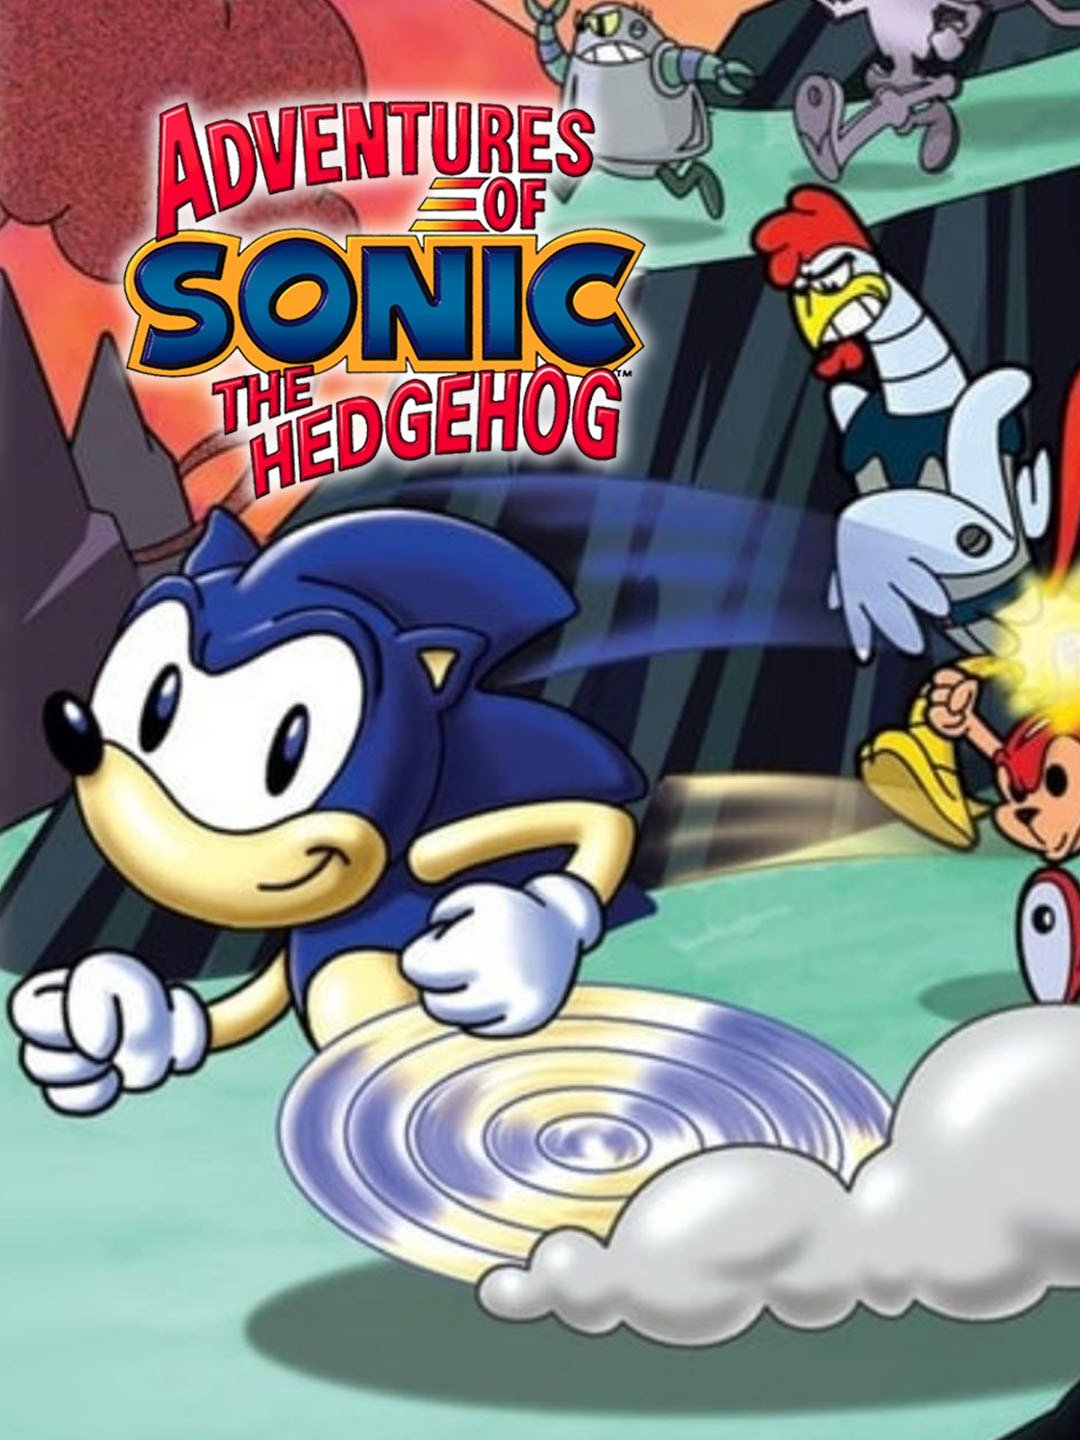 Adventures of Sonic the Hedgehog - Rotten Tomatoes